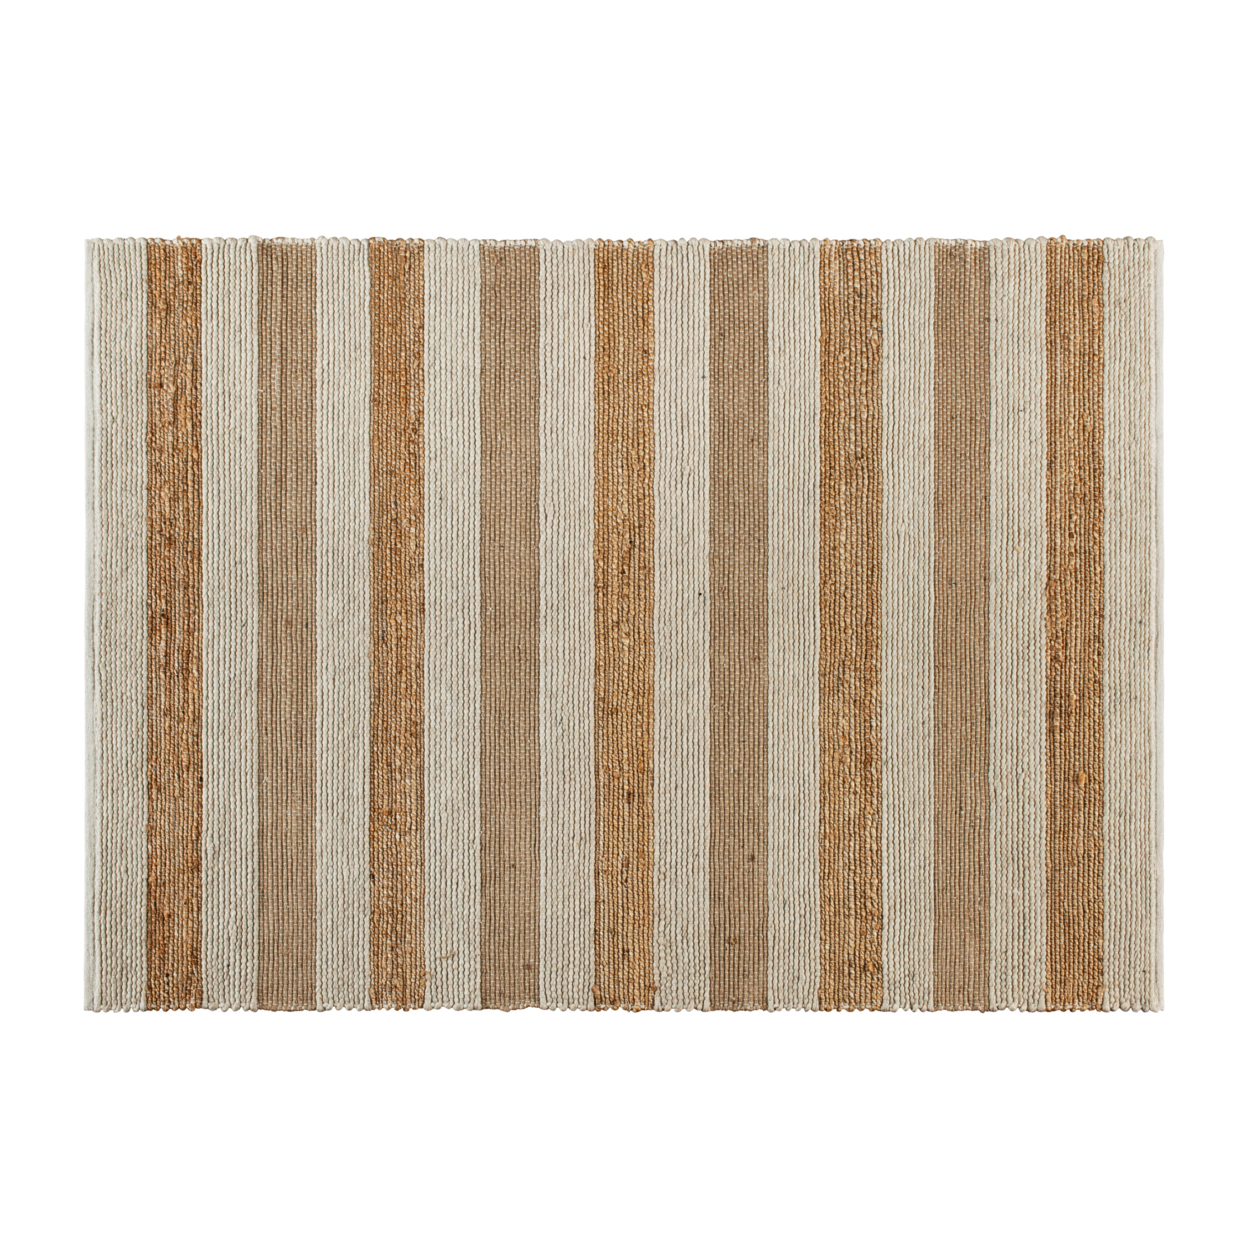 5' X 7' Handwoven Striped Jute Blend Area Rug In Natural Tones